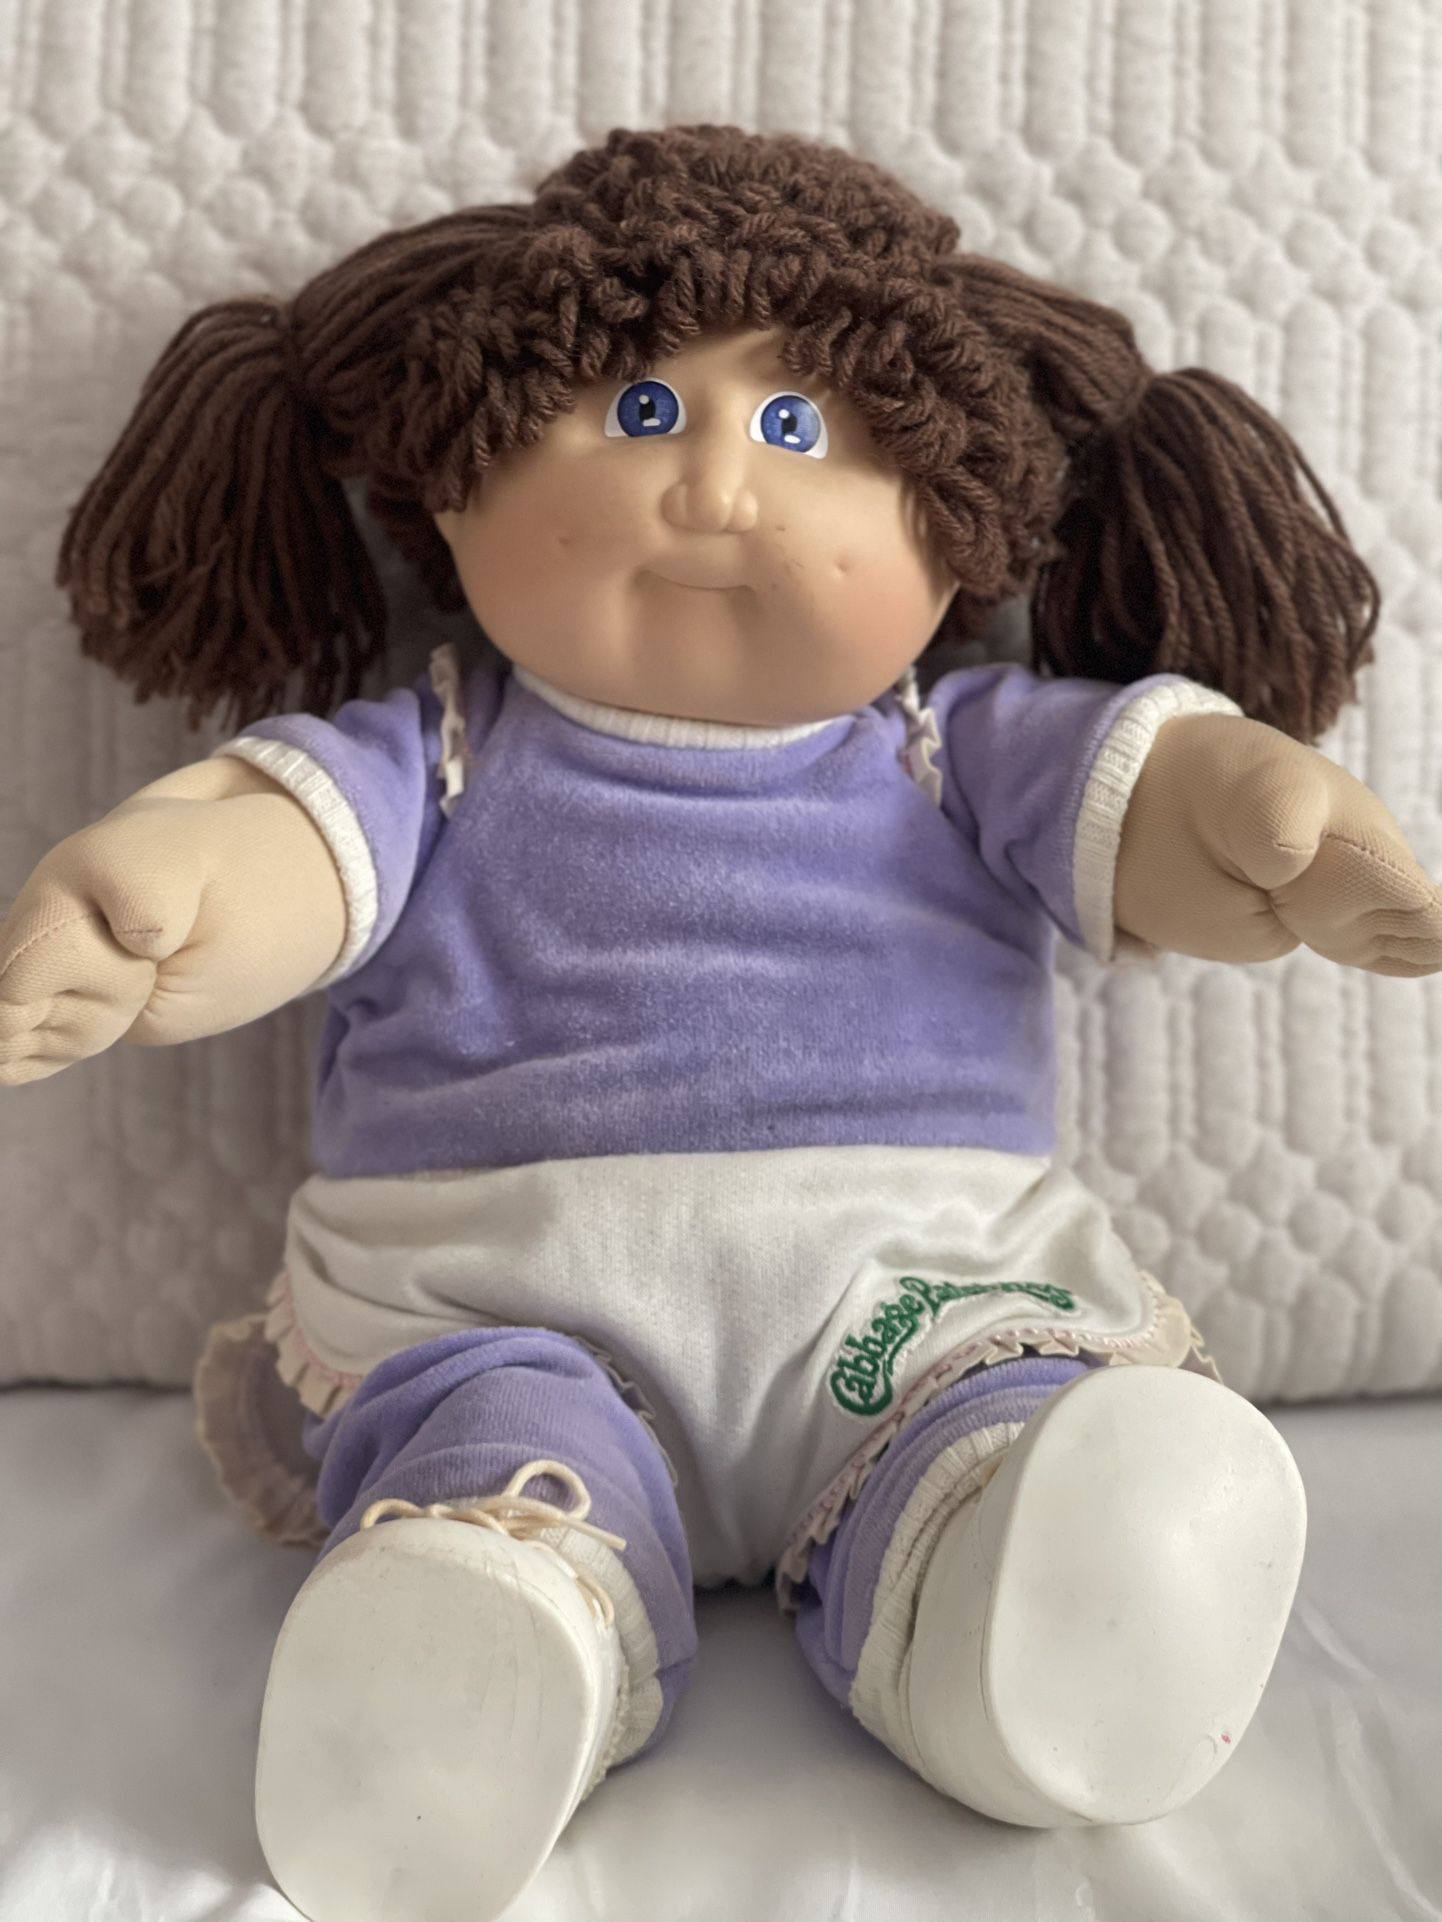 Original Cabbage Patch Doll Signed 